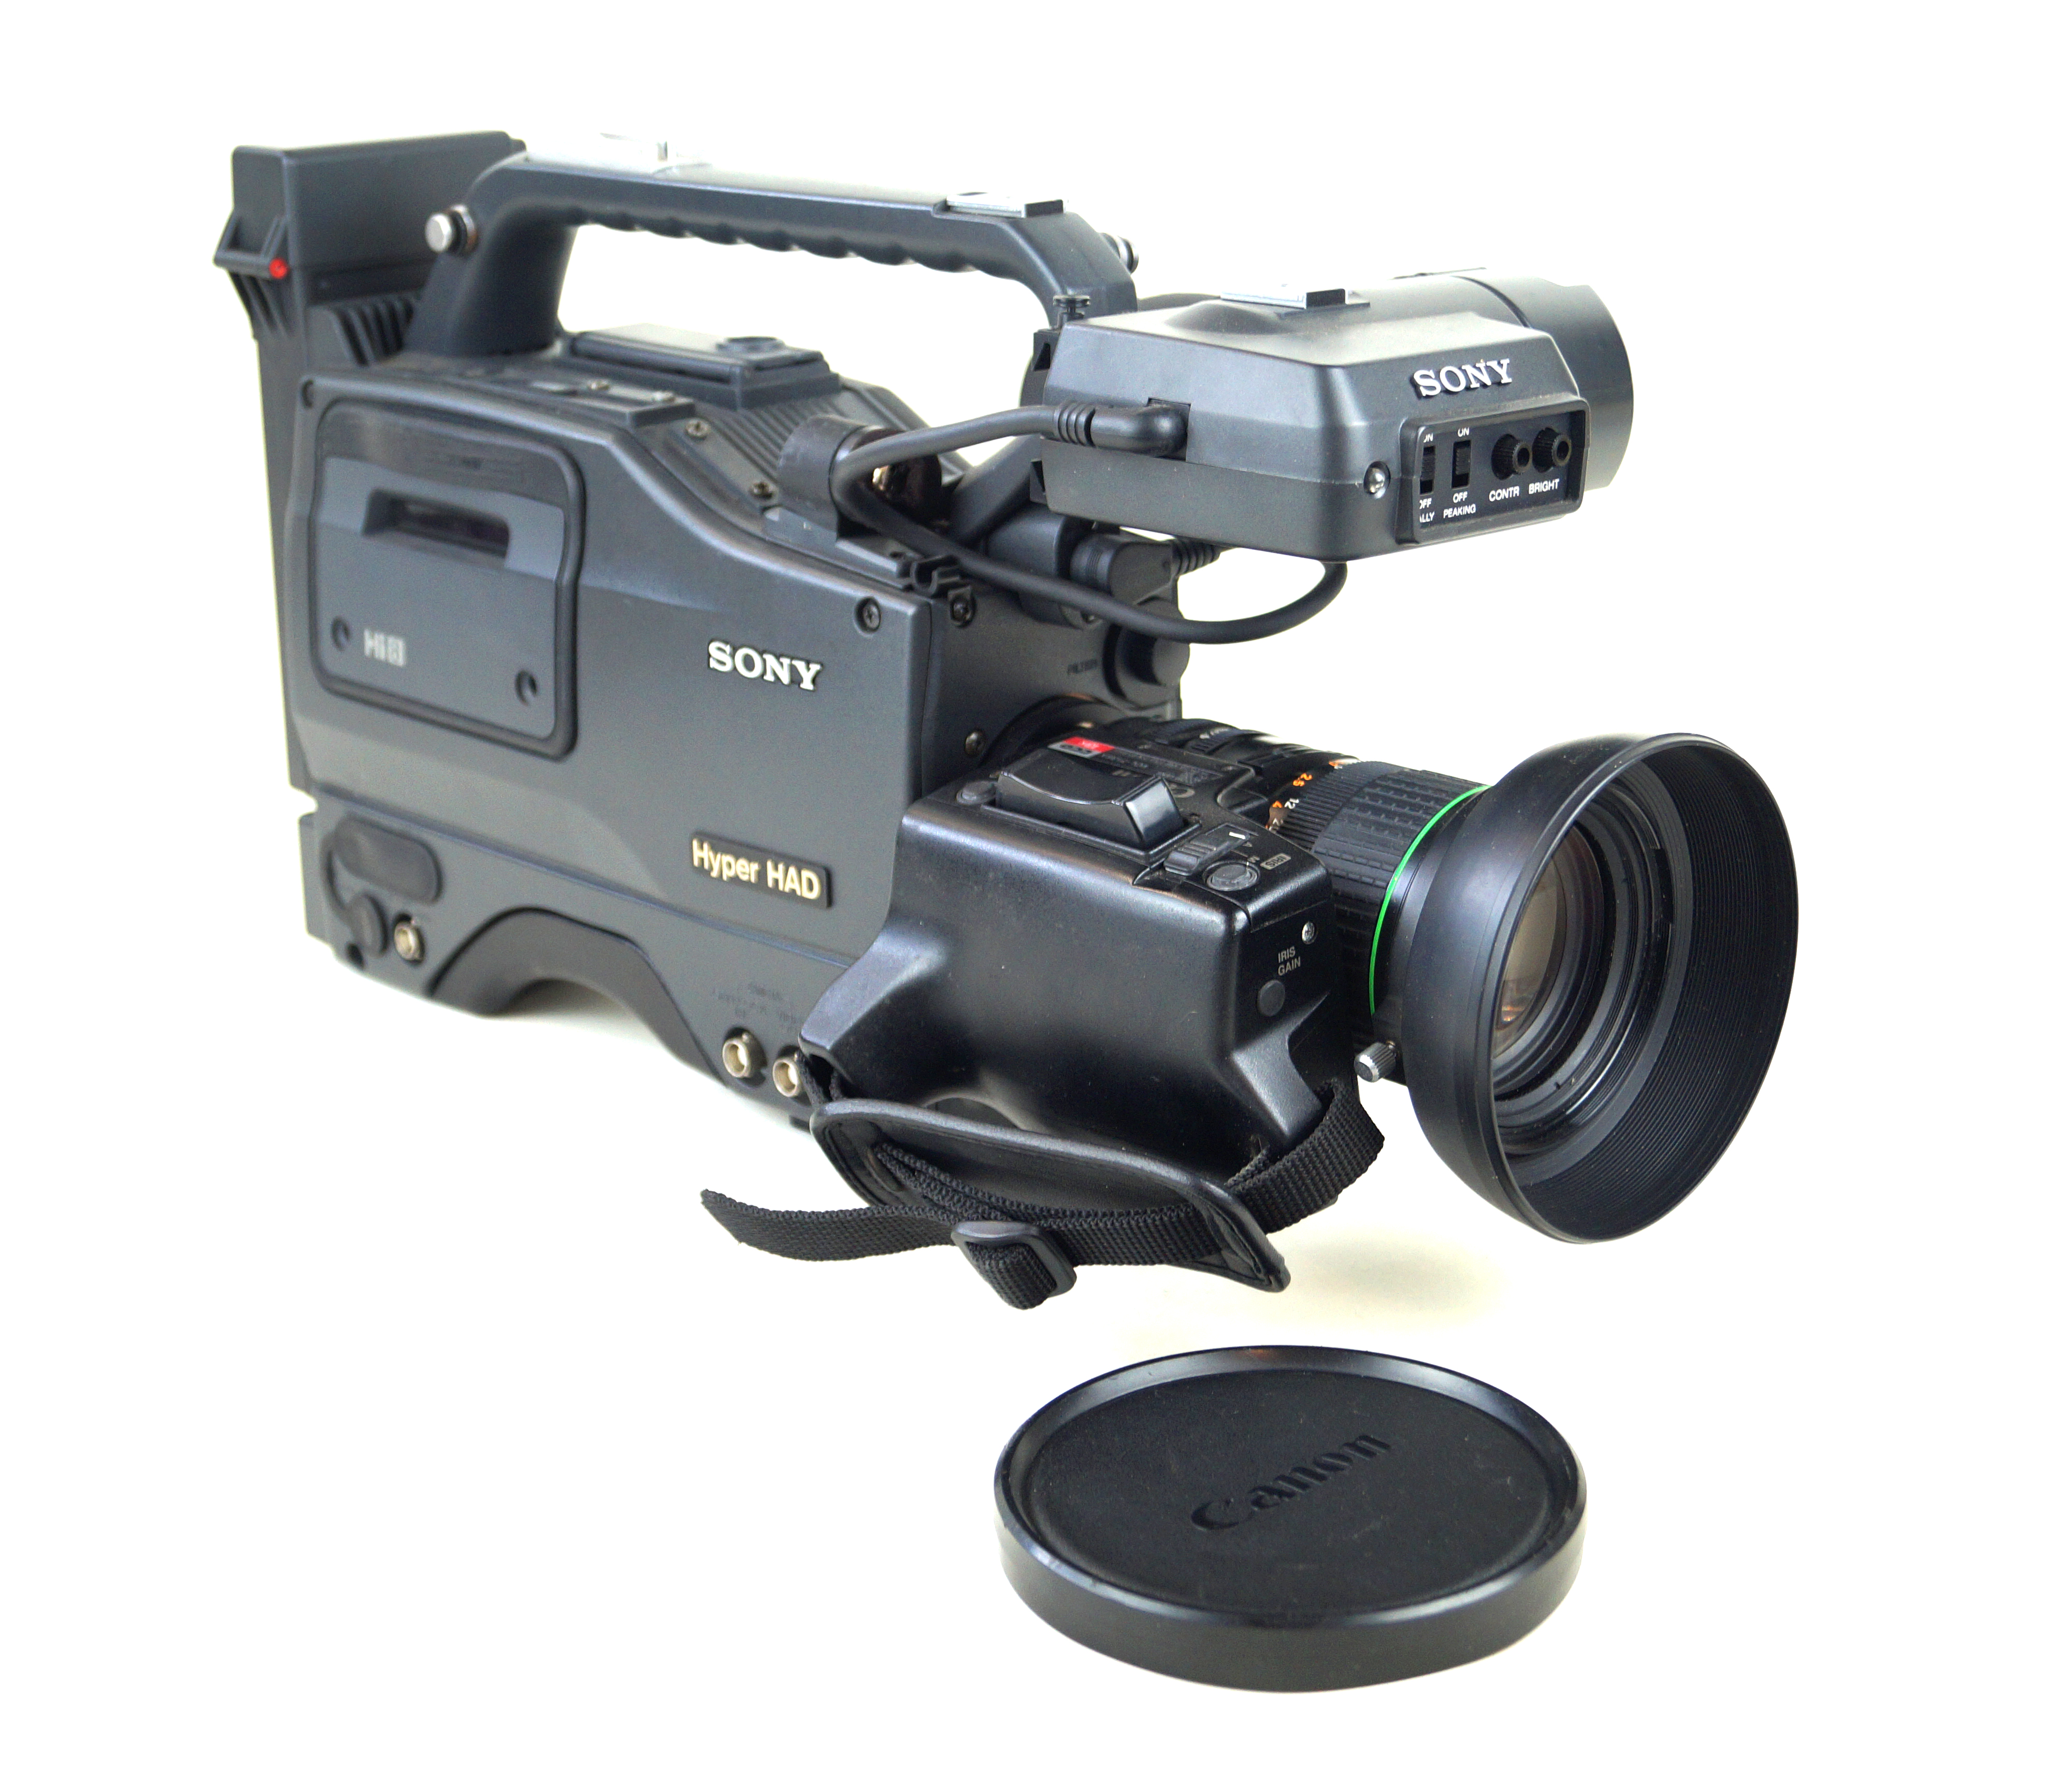 A Sony Hyper HAD video camera With Cannon zoom lens, VCL-713BX,